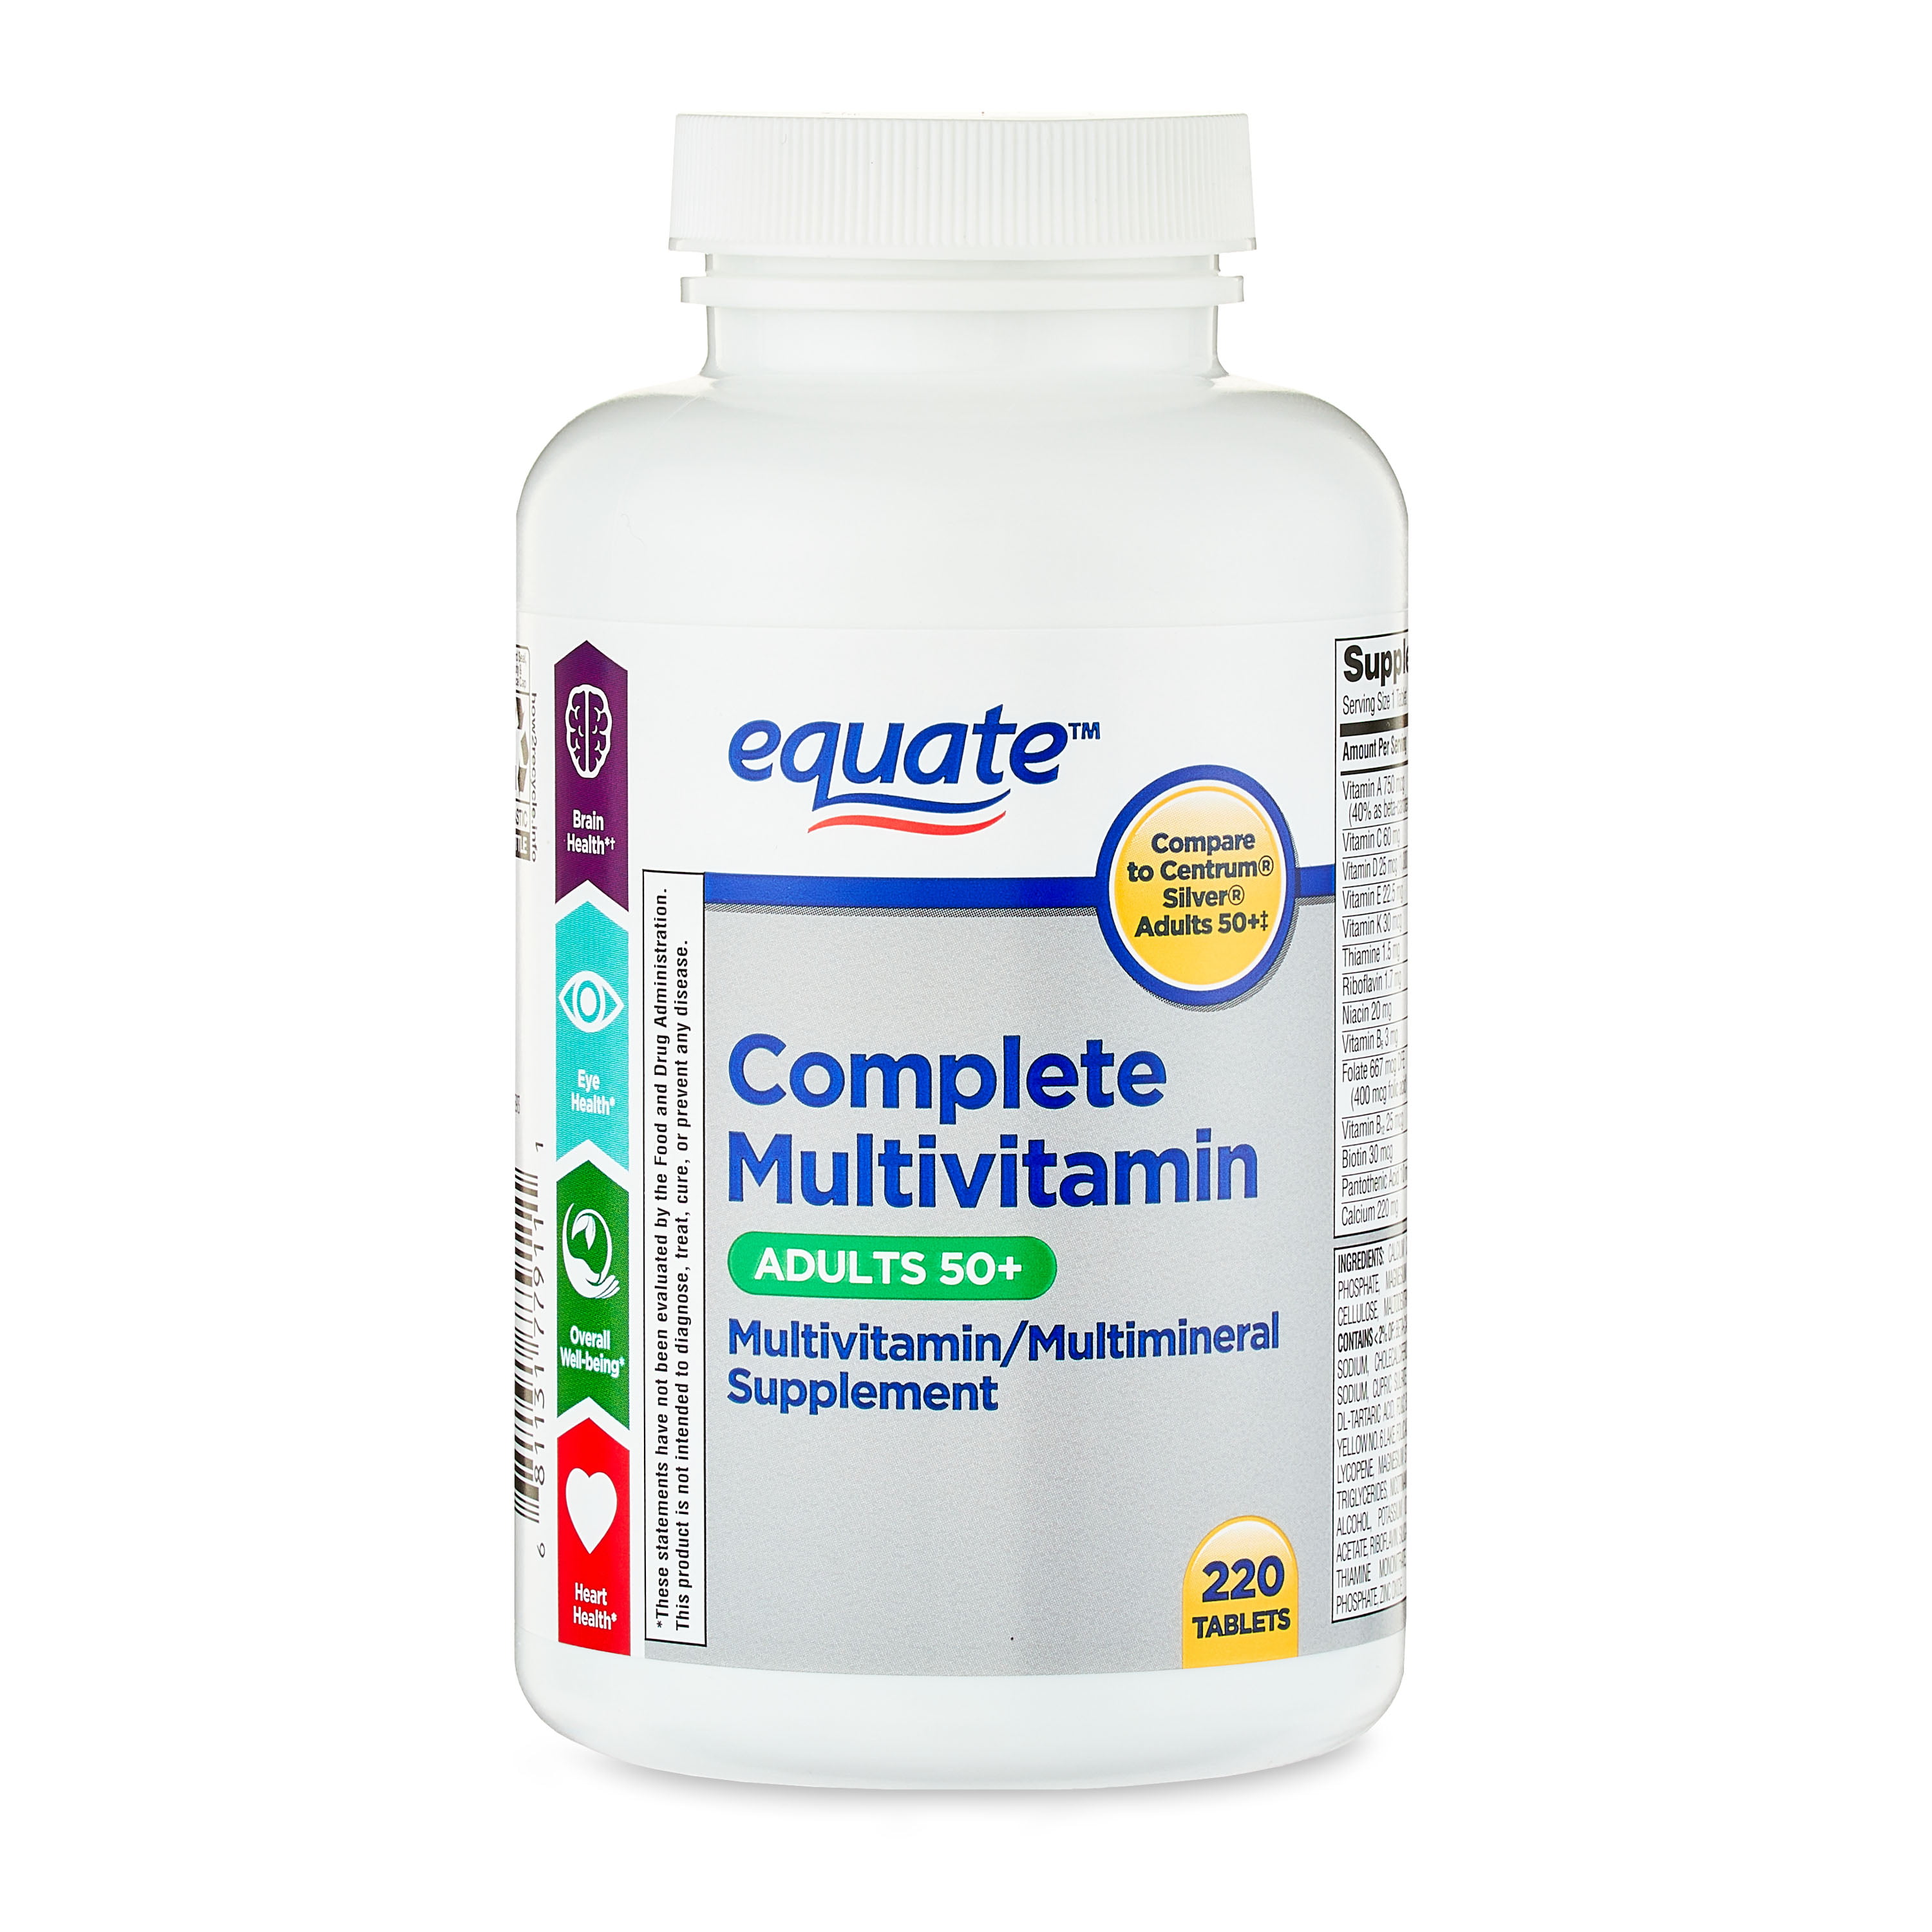 Complete Multivitamin/Multimineral Supplement Tablets, Adults 50+, 220 Count